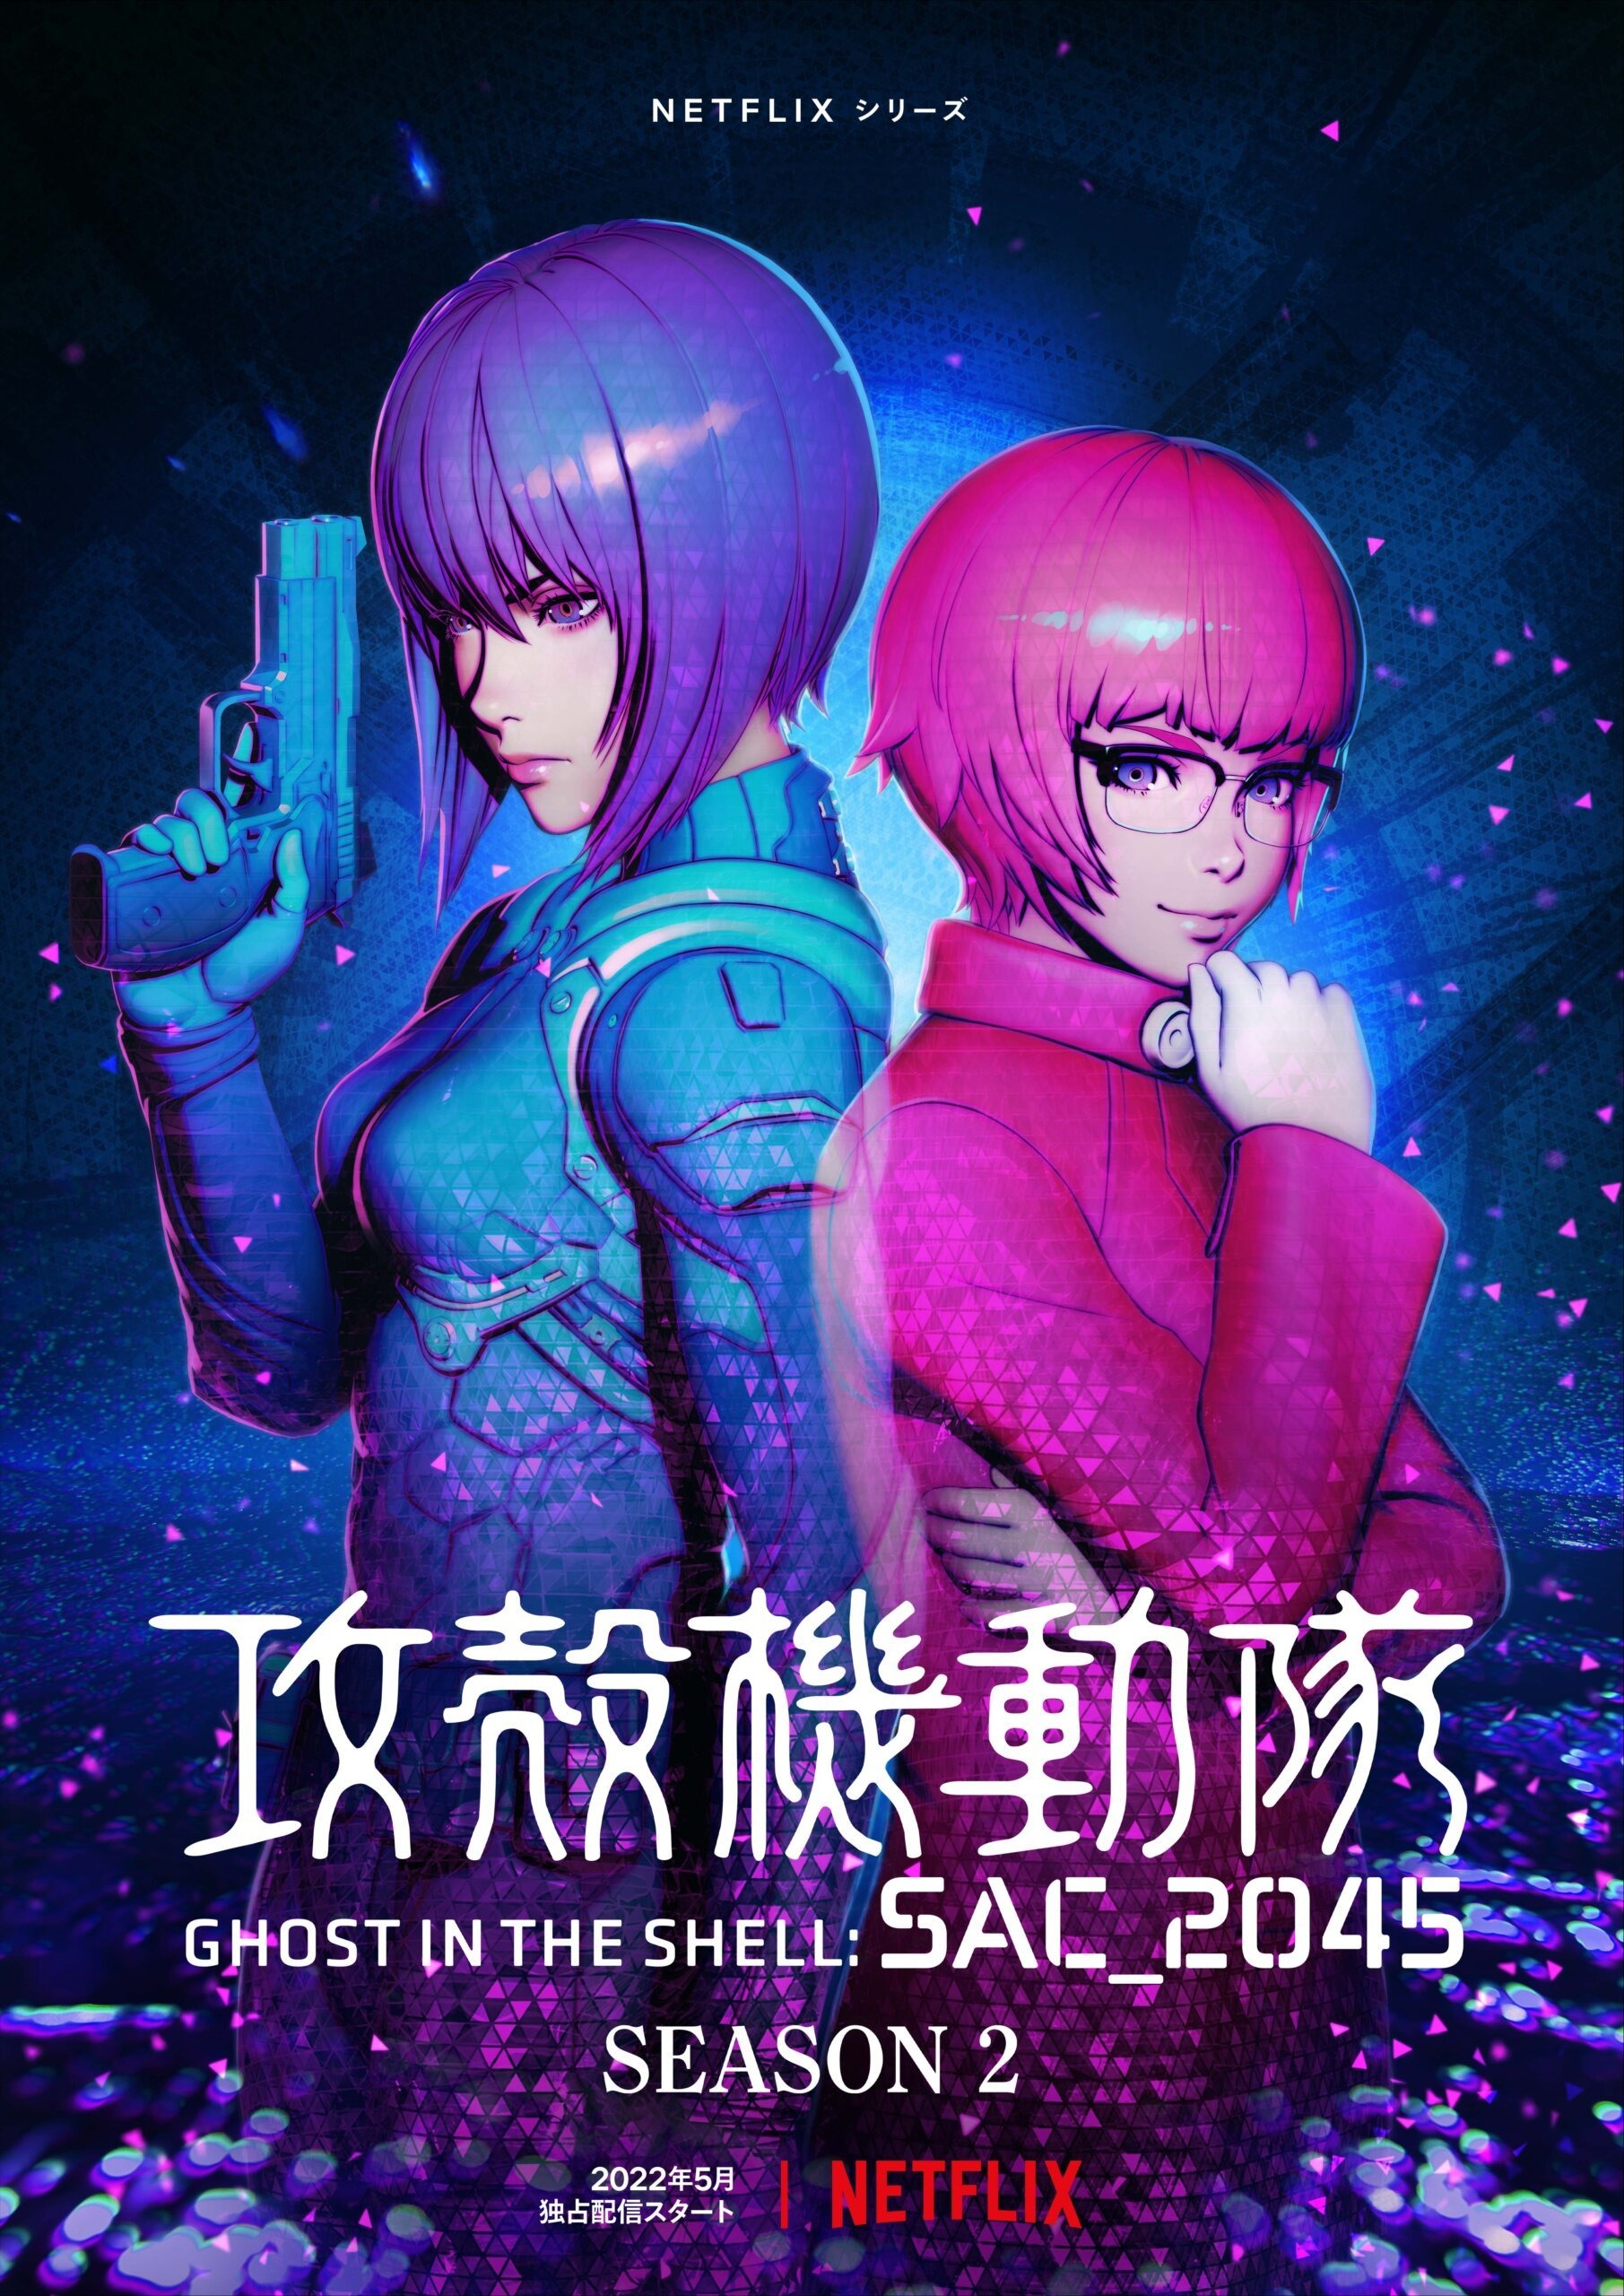 Mega Sized TV Poster Image for Ghost in the Shell SAC_2045 (#4 of 5)